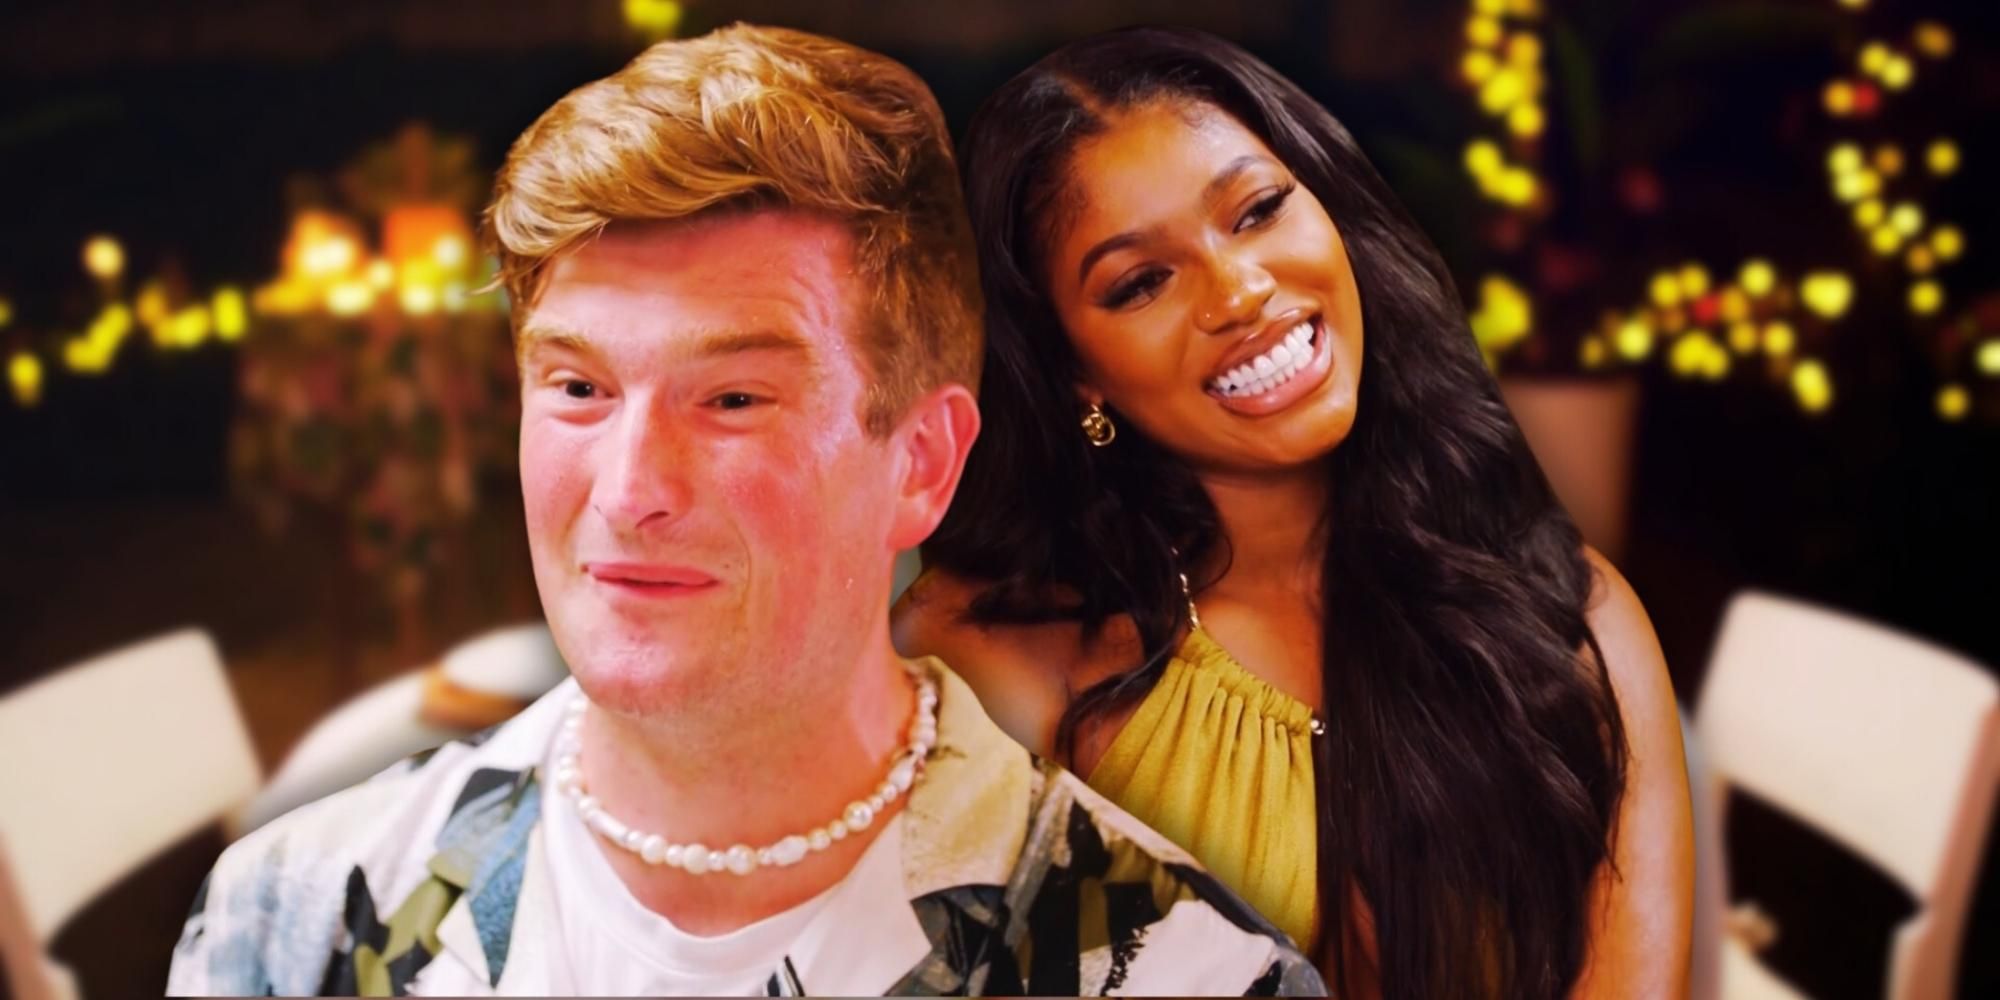 Could Bergie Finally Have Found A Love Island USA Match With Imani?